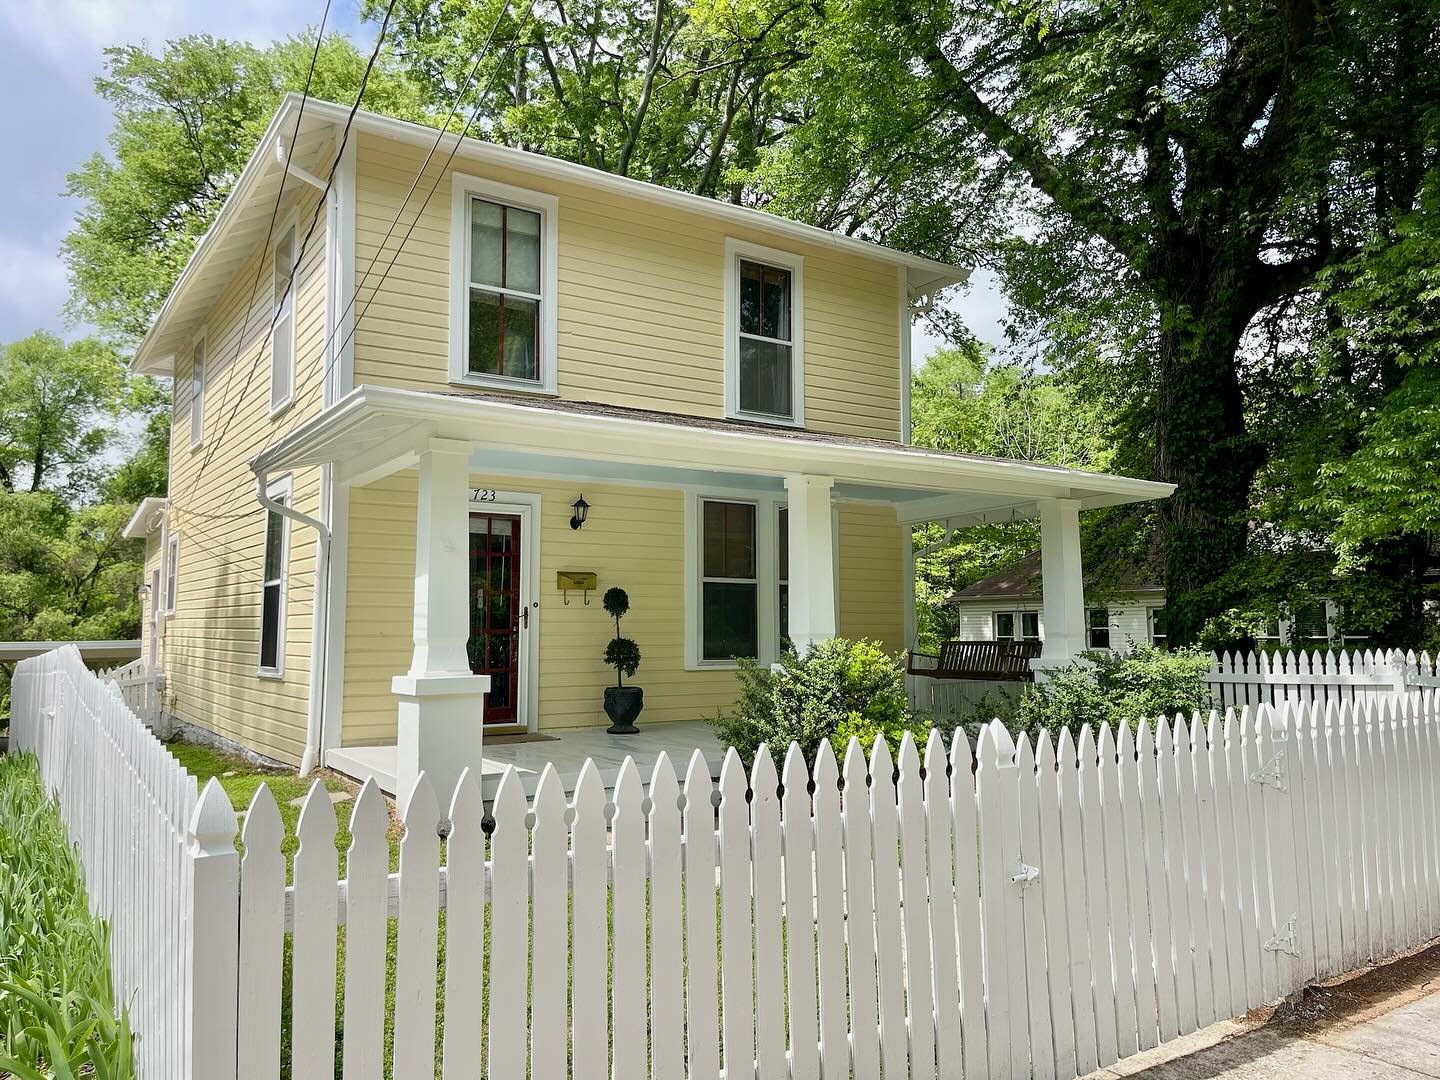 New listing! Welcome home to this gorgeous downtown property that is full of historic charm and original detail, yet fully updated and move-in ready. Call or DM us to schedule a tour and make this dreamy property yours! 

🗝️ 723 Kendrick Street, Flo